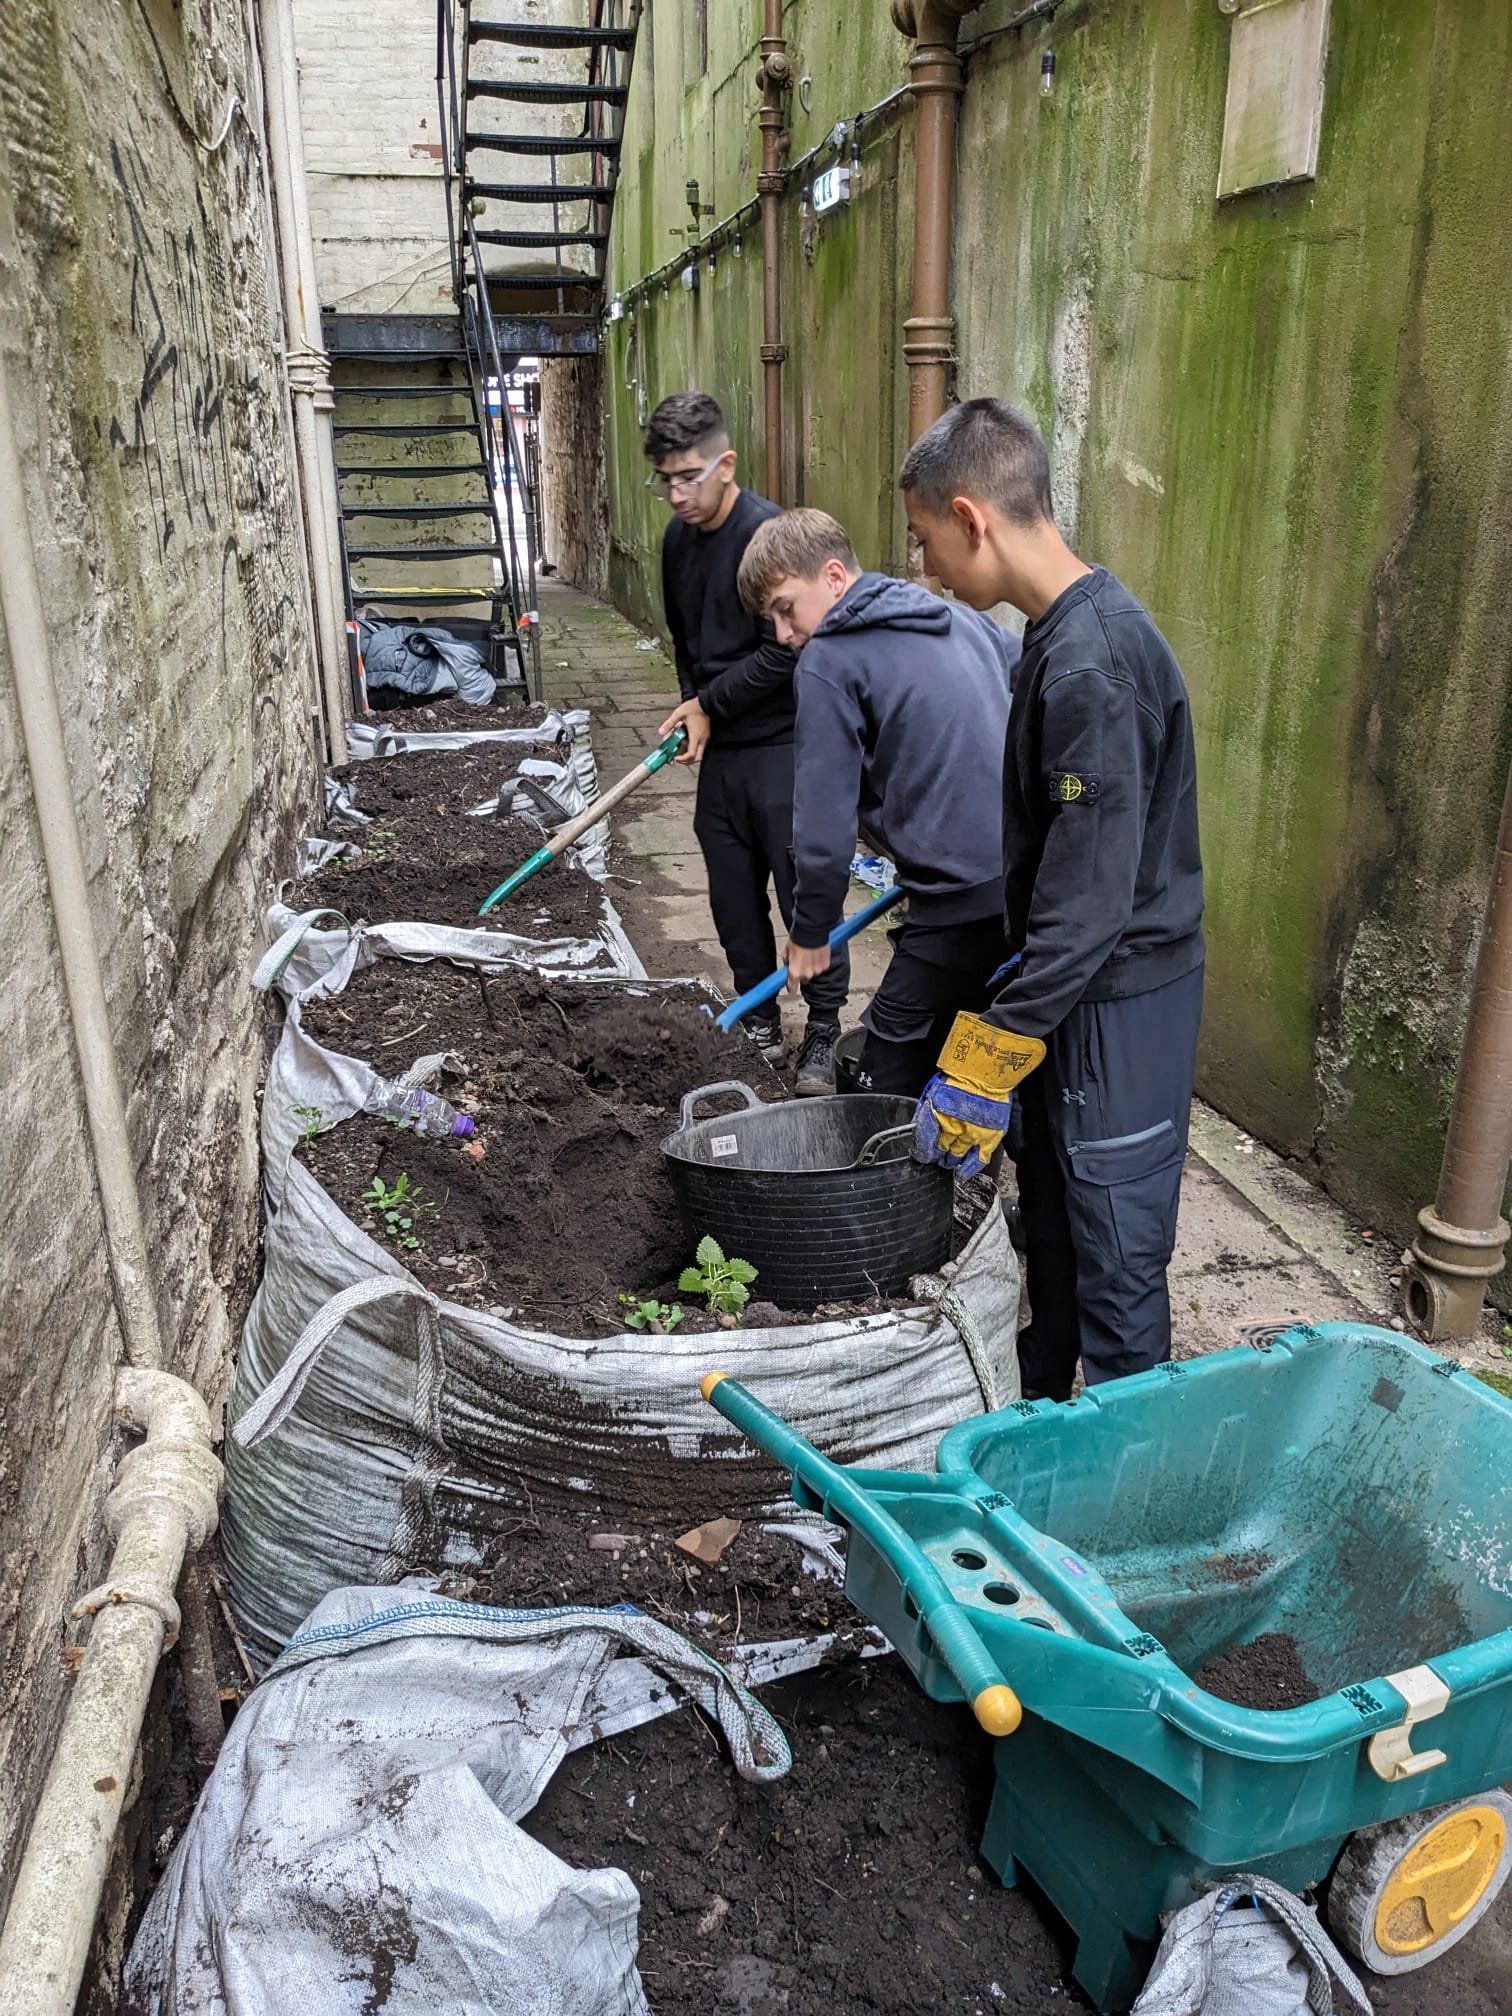 2 - From the back to the front, Caner Yildirim, Callan Potts and Josh Dingwall gathering soil onsite to fill planters.jpg